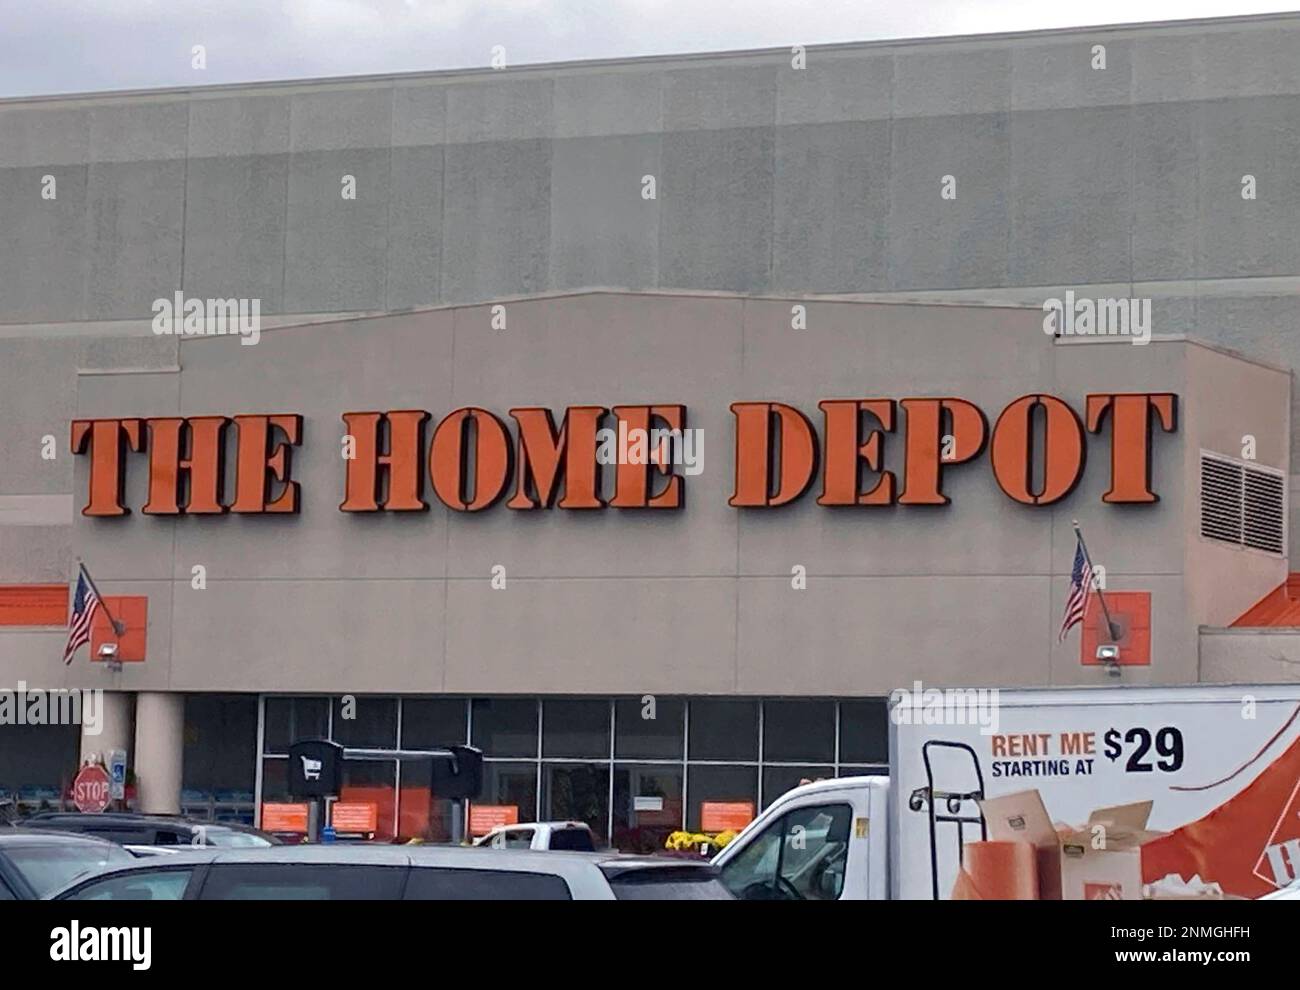 Get Home Depot Delivery Straight to Your Home or Work Site - The Home Depot